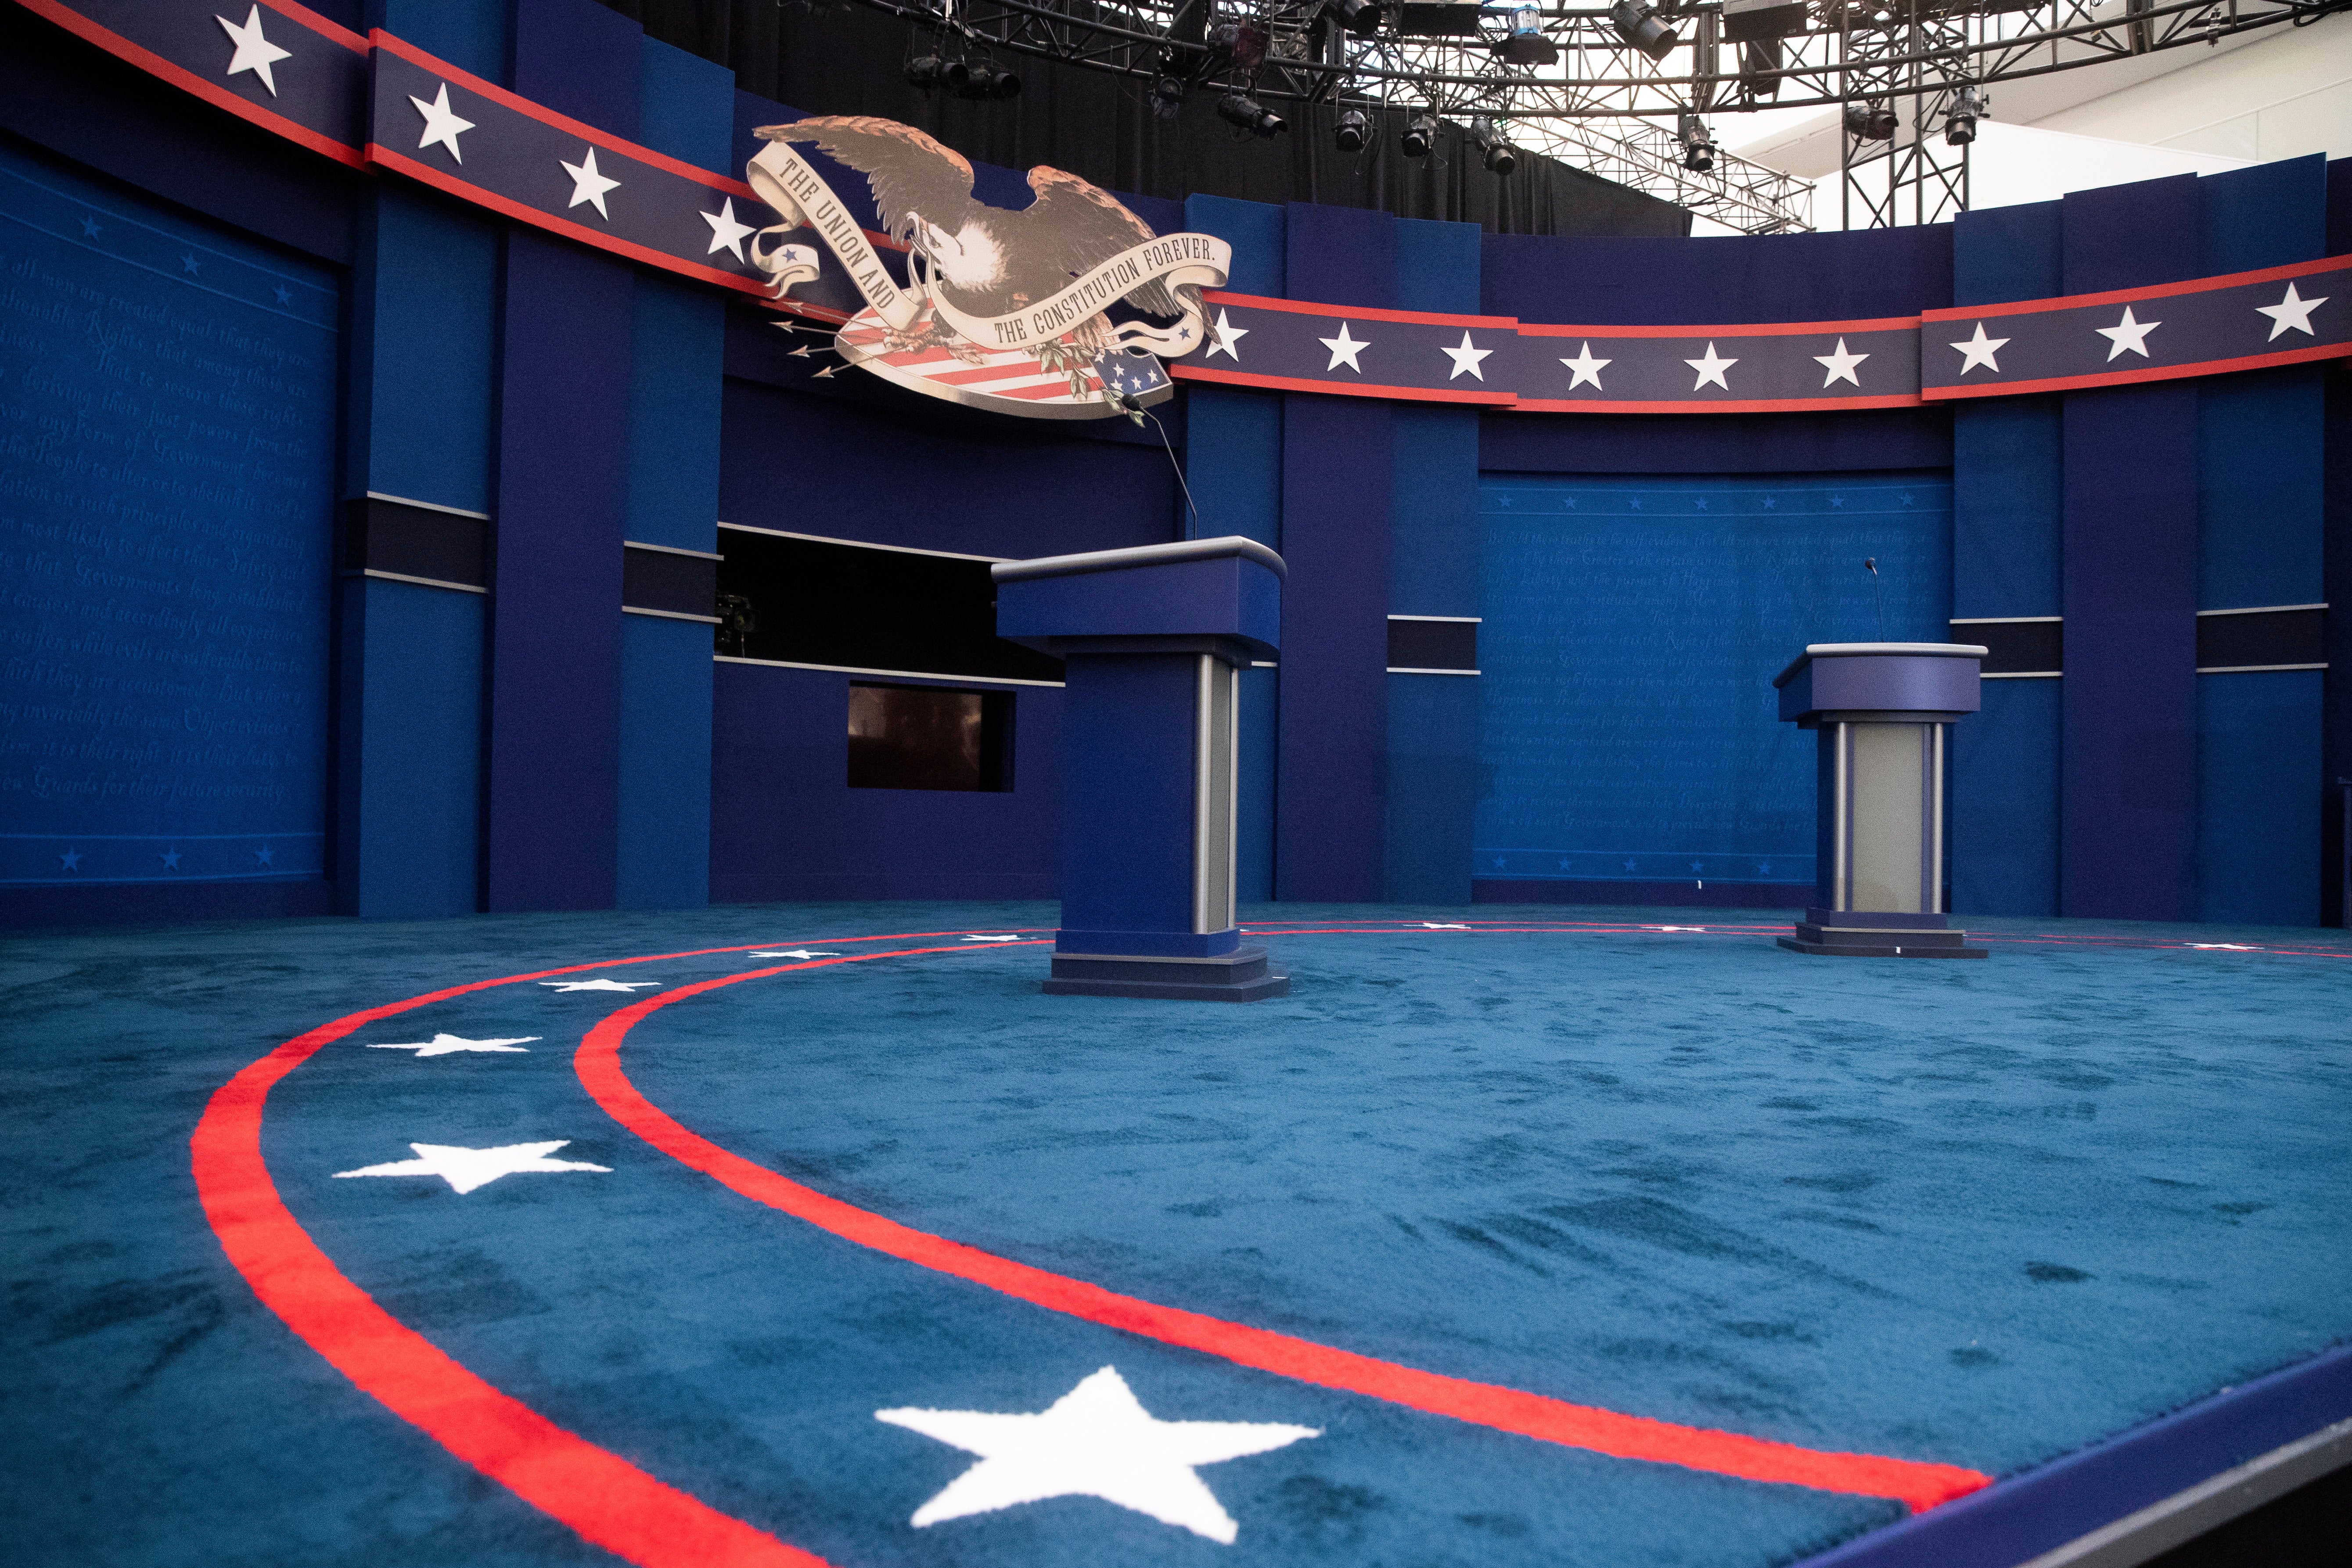 The stage is prepared for the first 2020 presidential debate in Cleveland, Ohio.